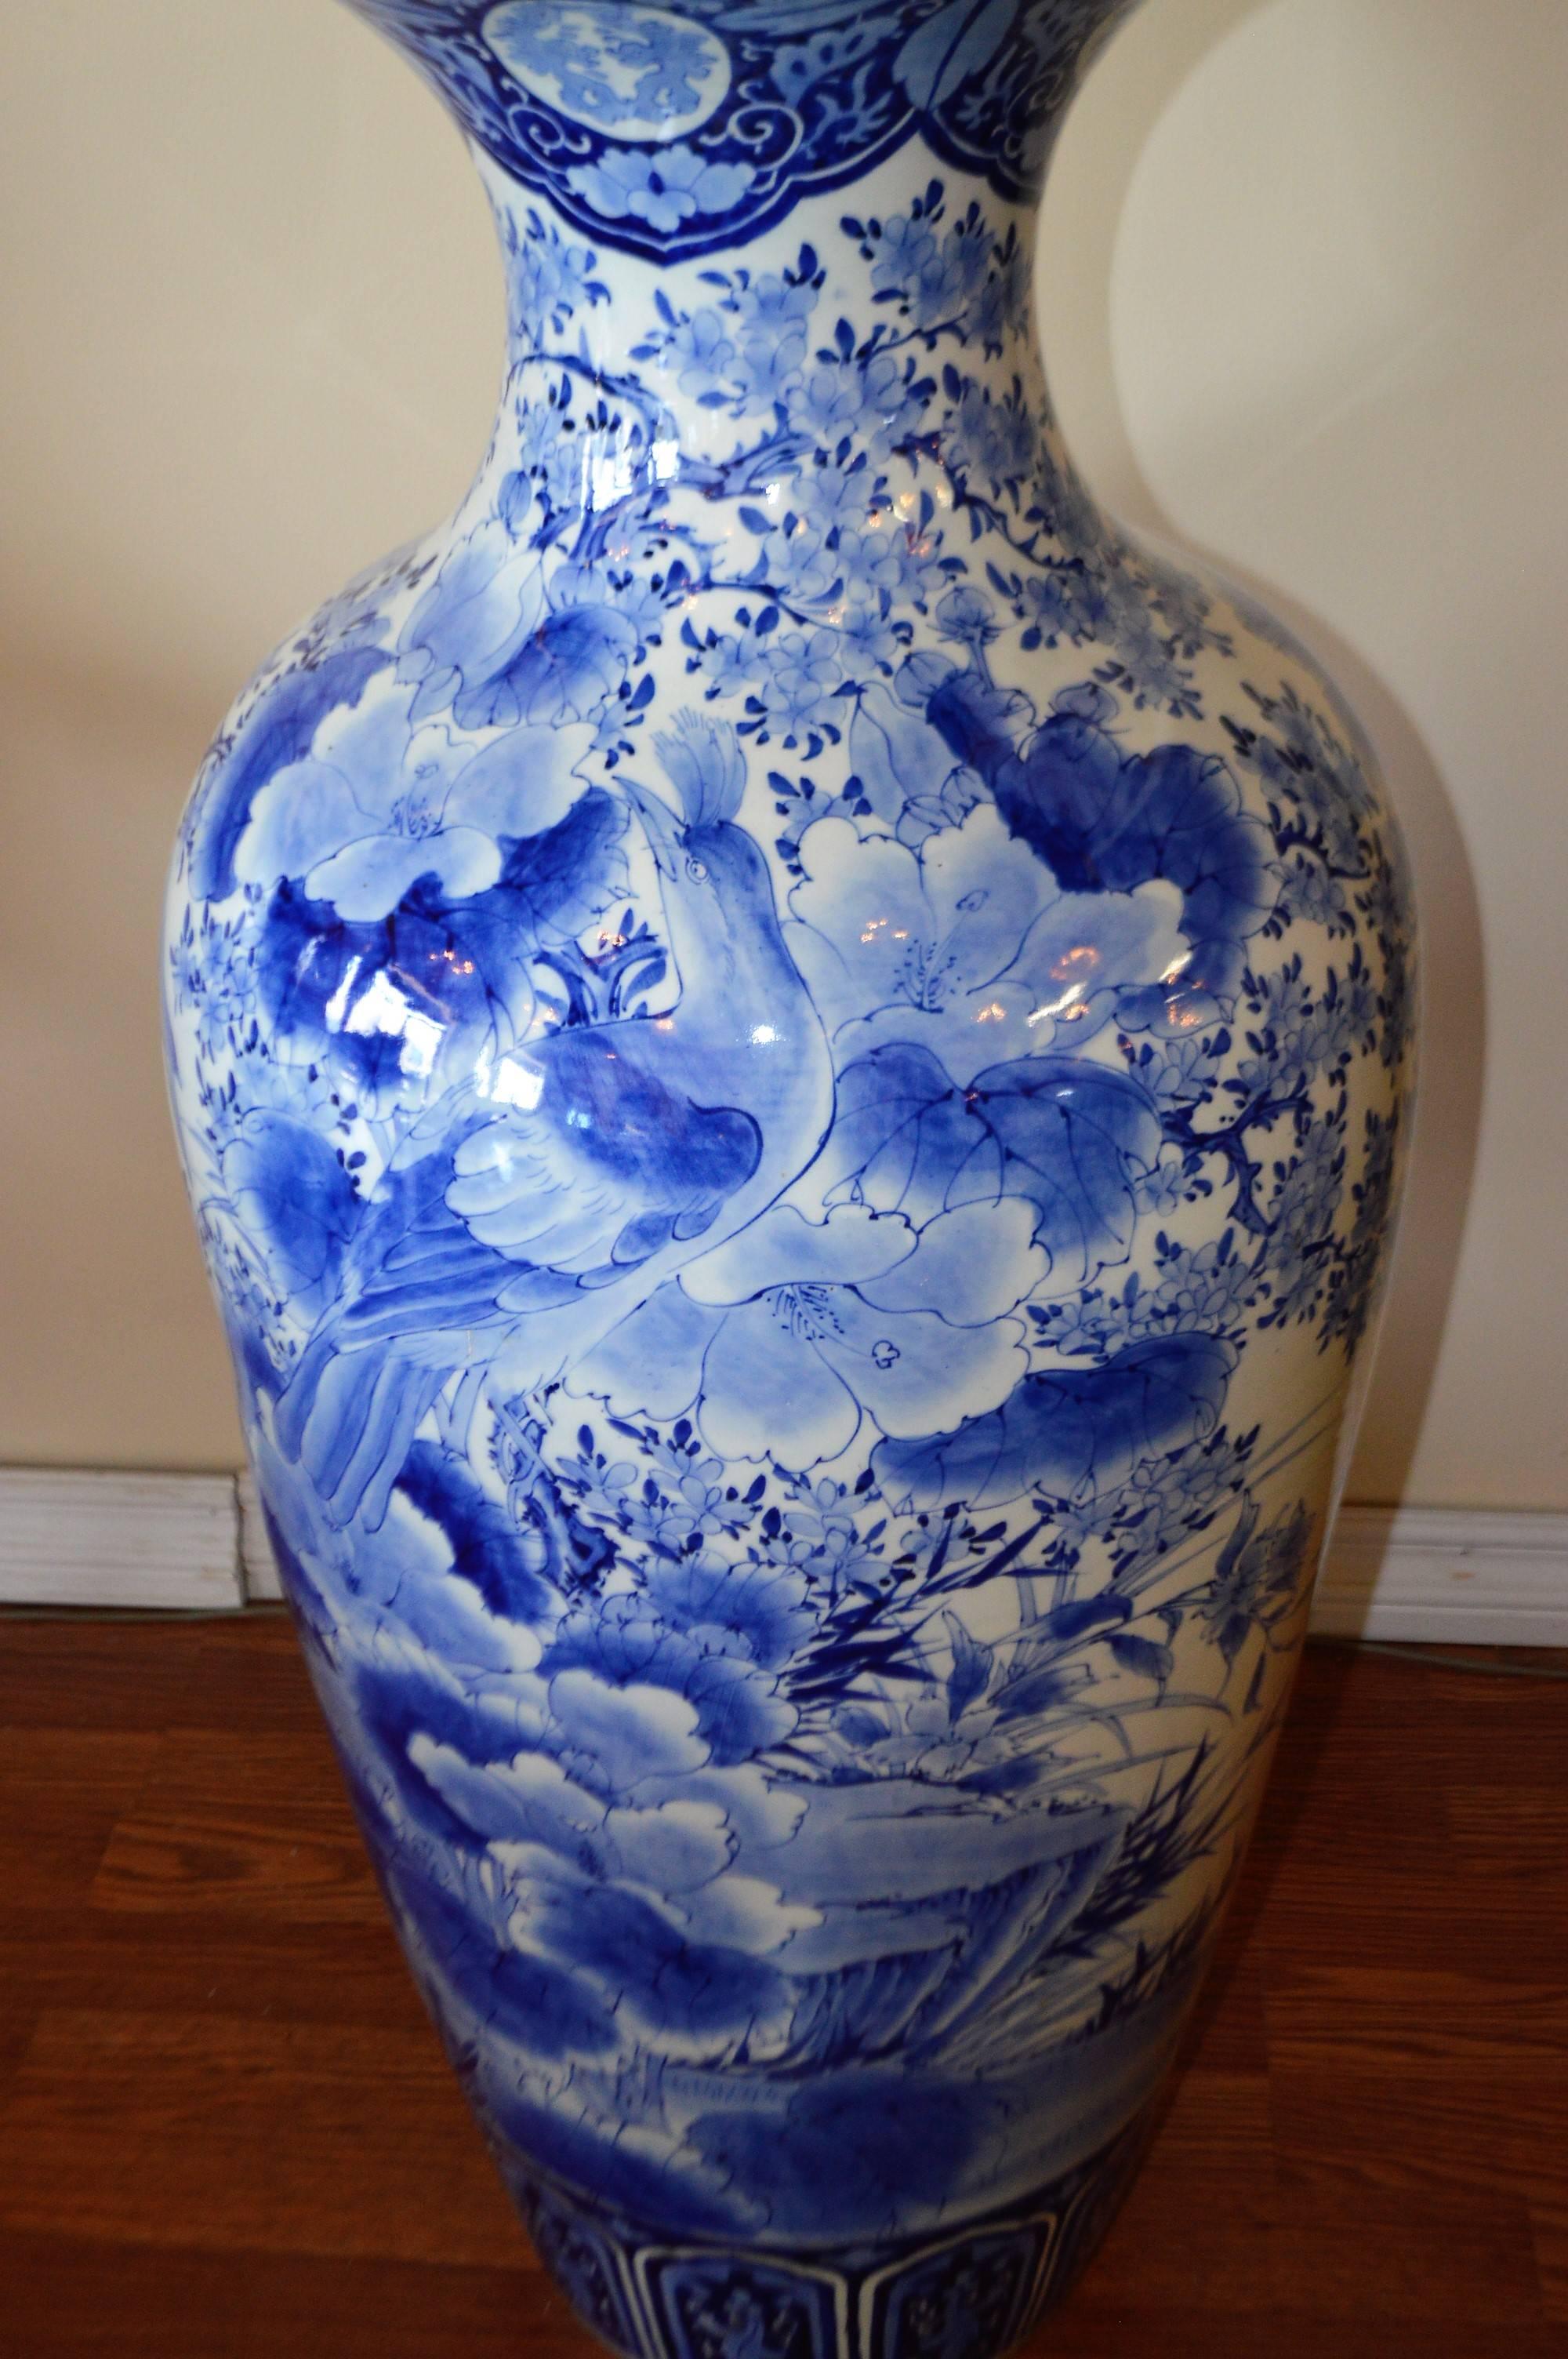 Stunning, large and highly decorative blue and white 19th century imari Japanese hand-painted porcelain vase. Decorated with large peacock birds and large flowers.